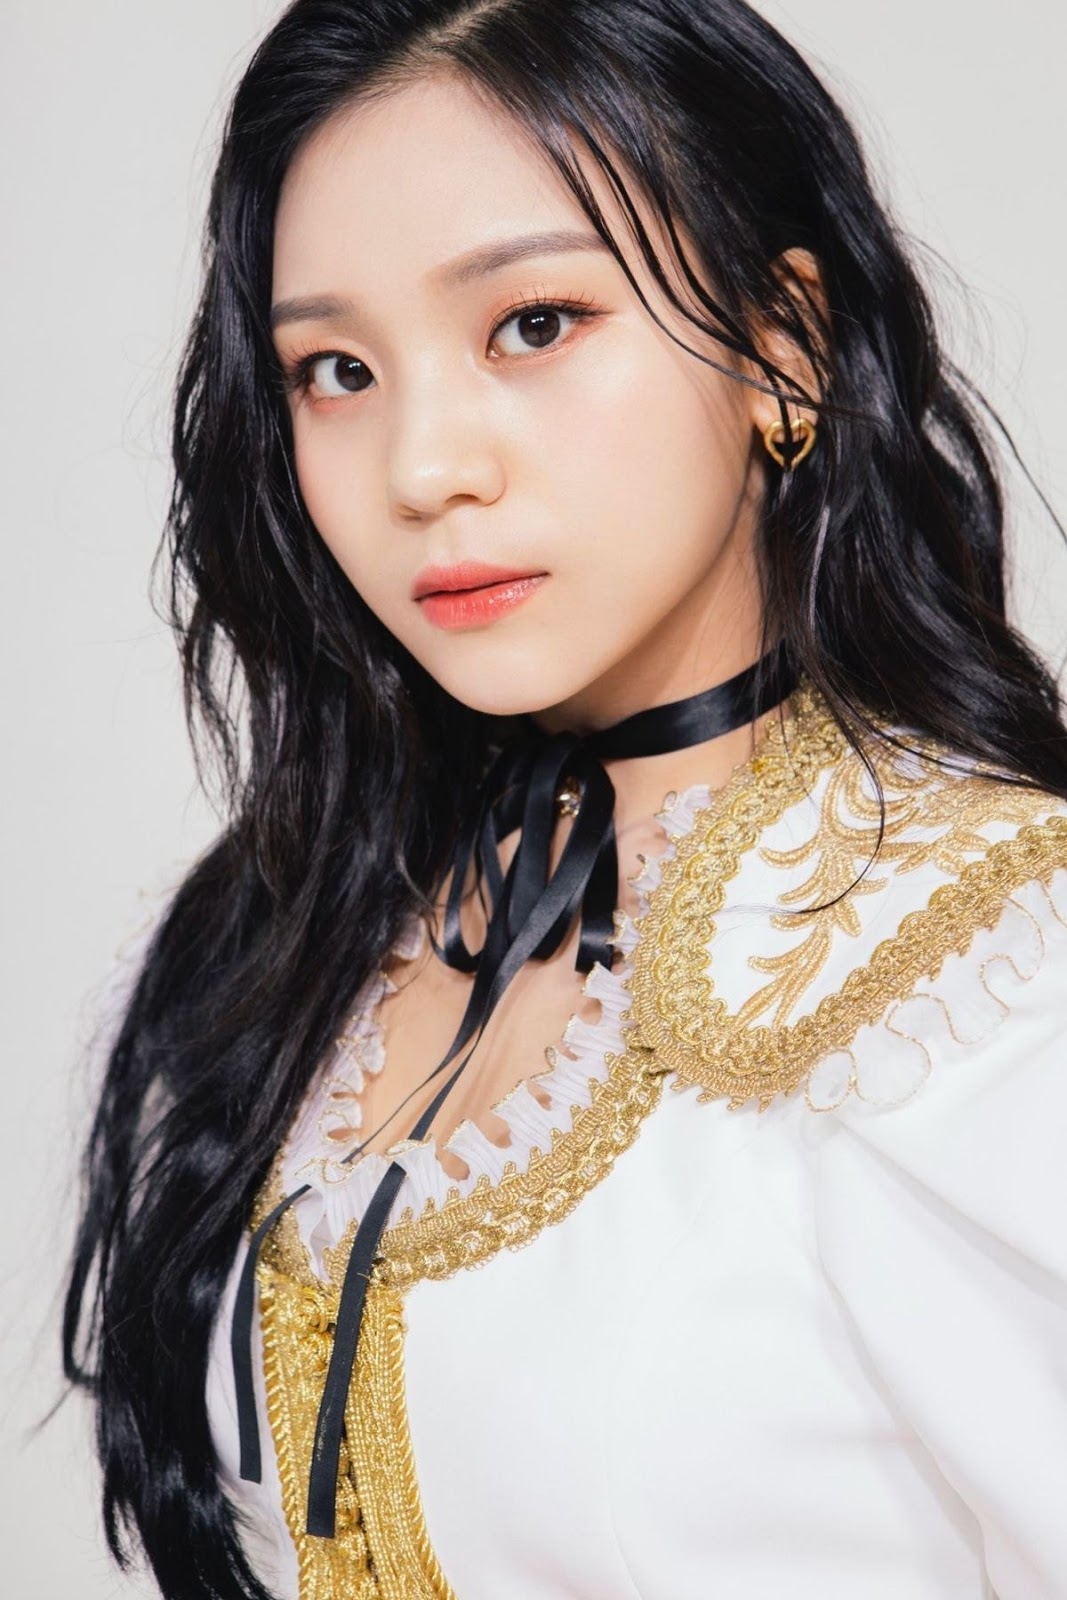 The recent whereabouts of GFriend's Umji, who's being in talk for her ...